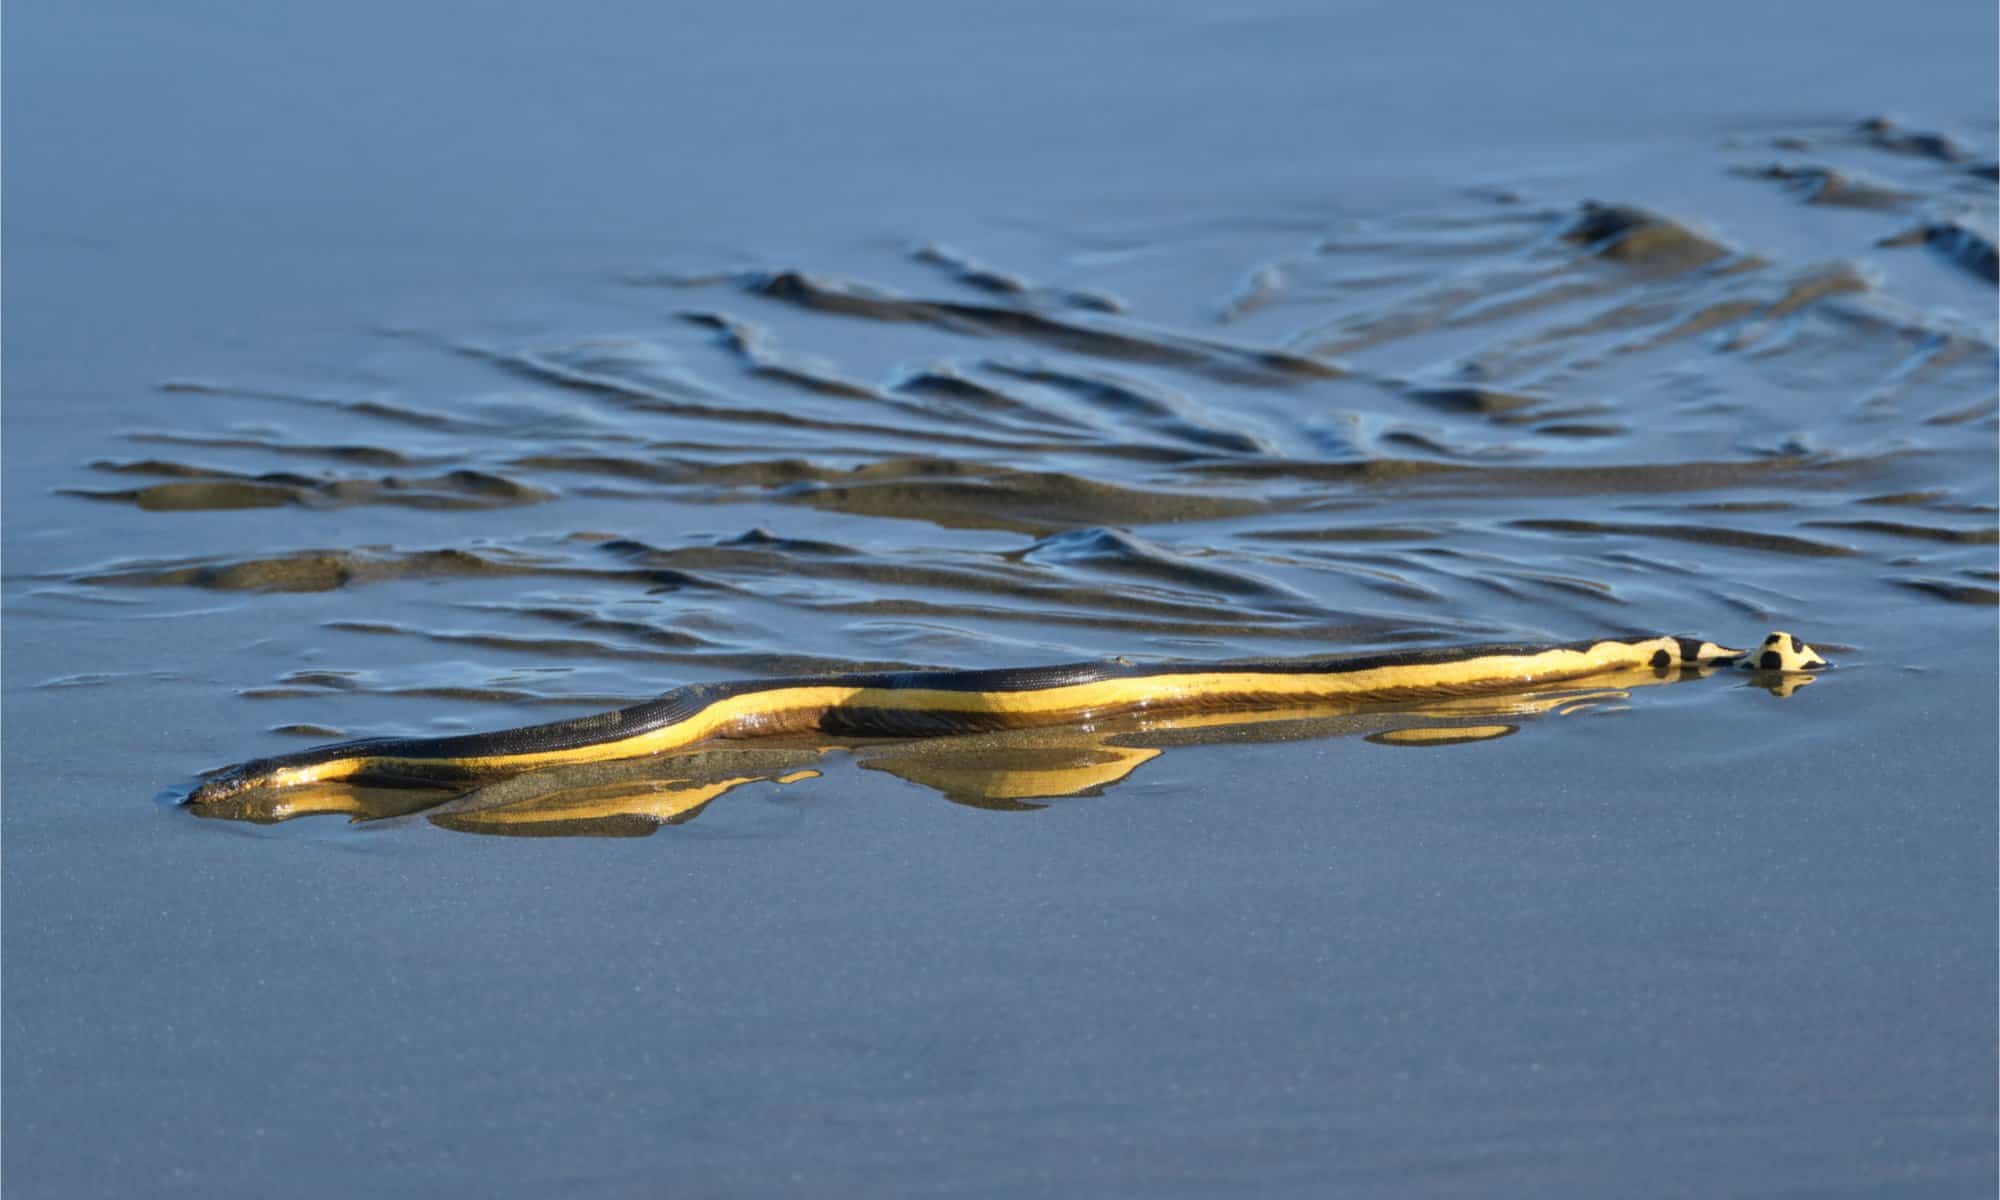 10 Fastest Snakes in the World: The Fastest Striking Snake in the World